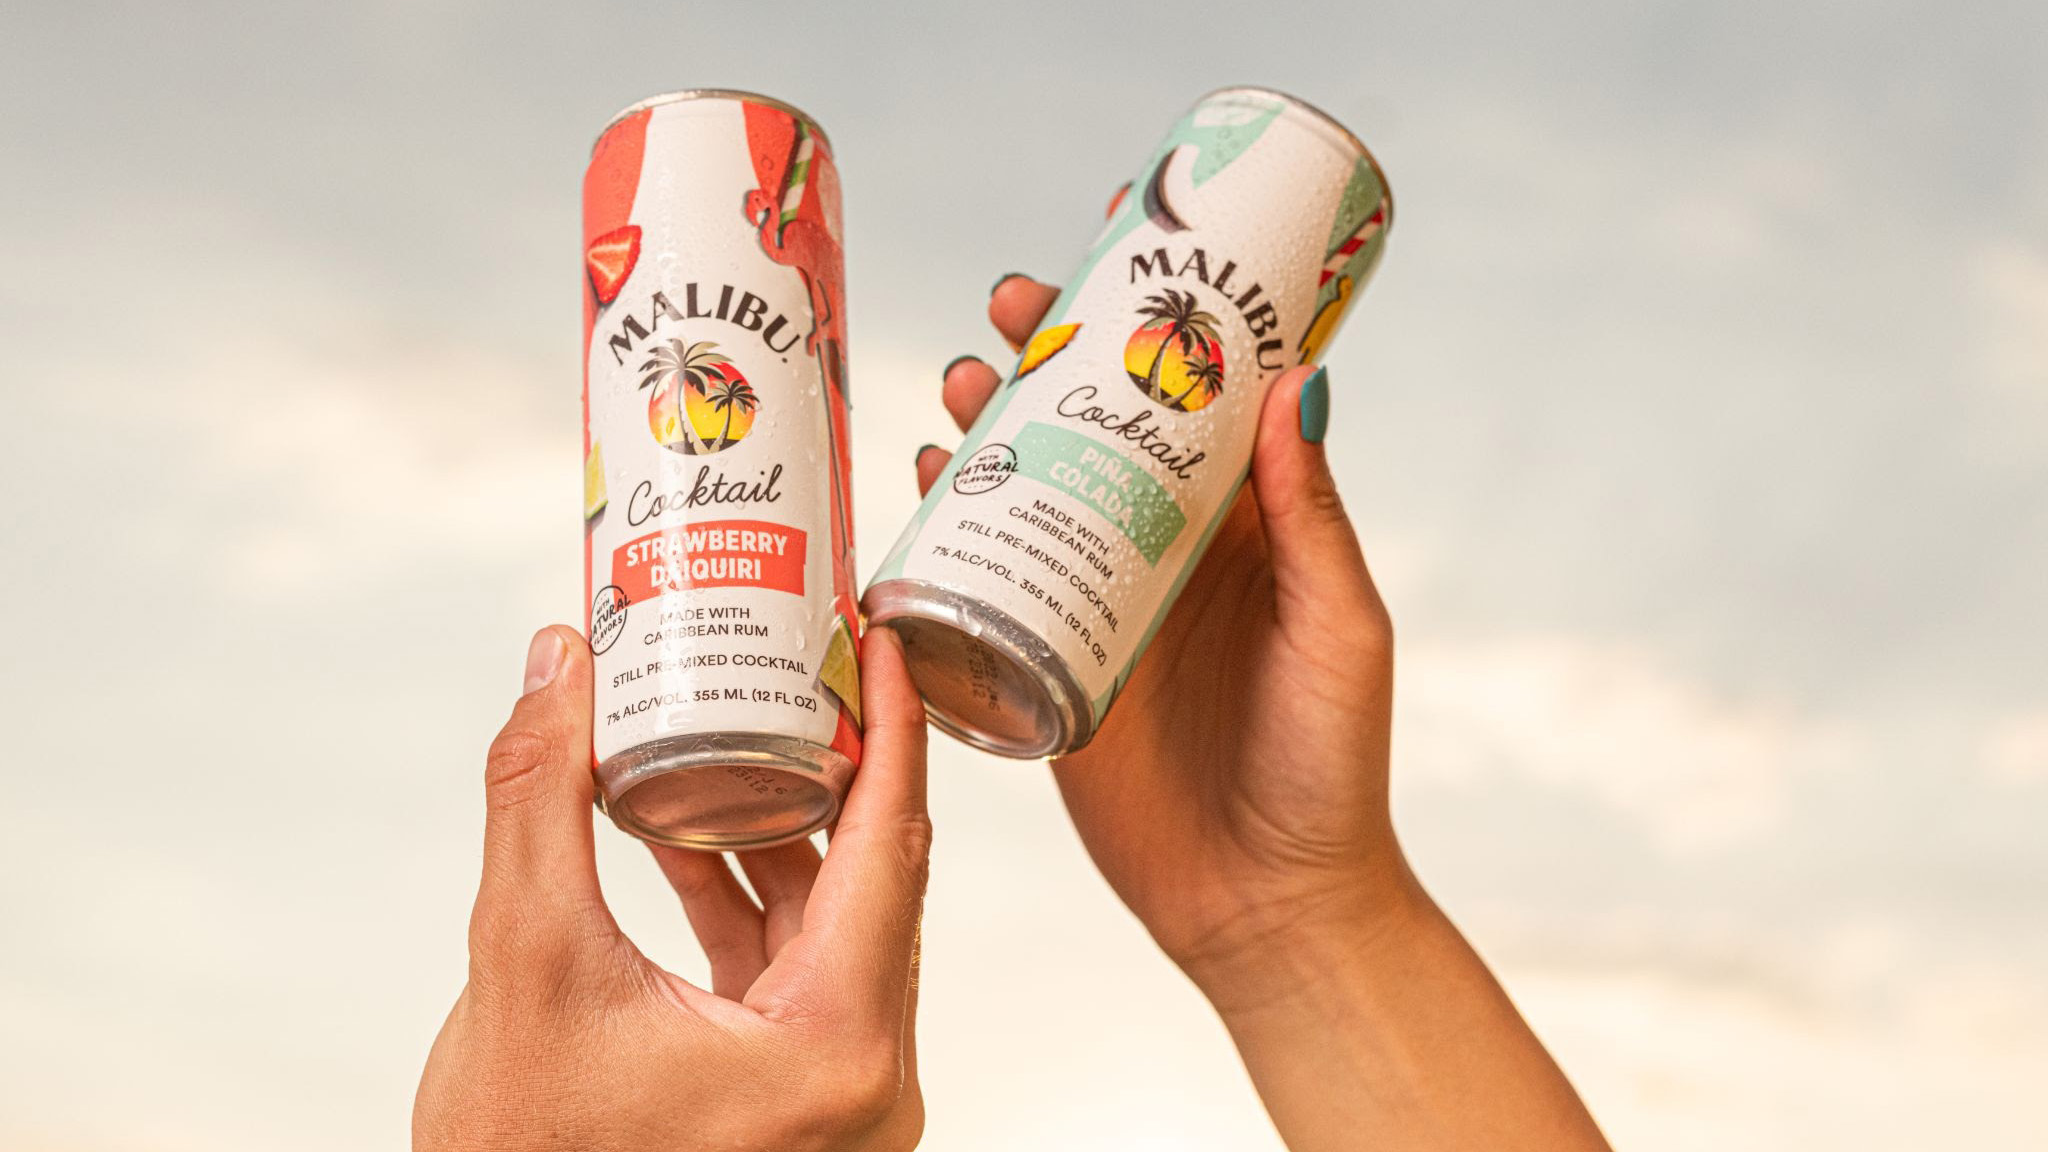 Malibu Cocktails in a Can